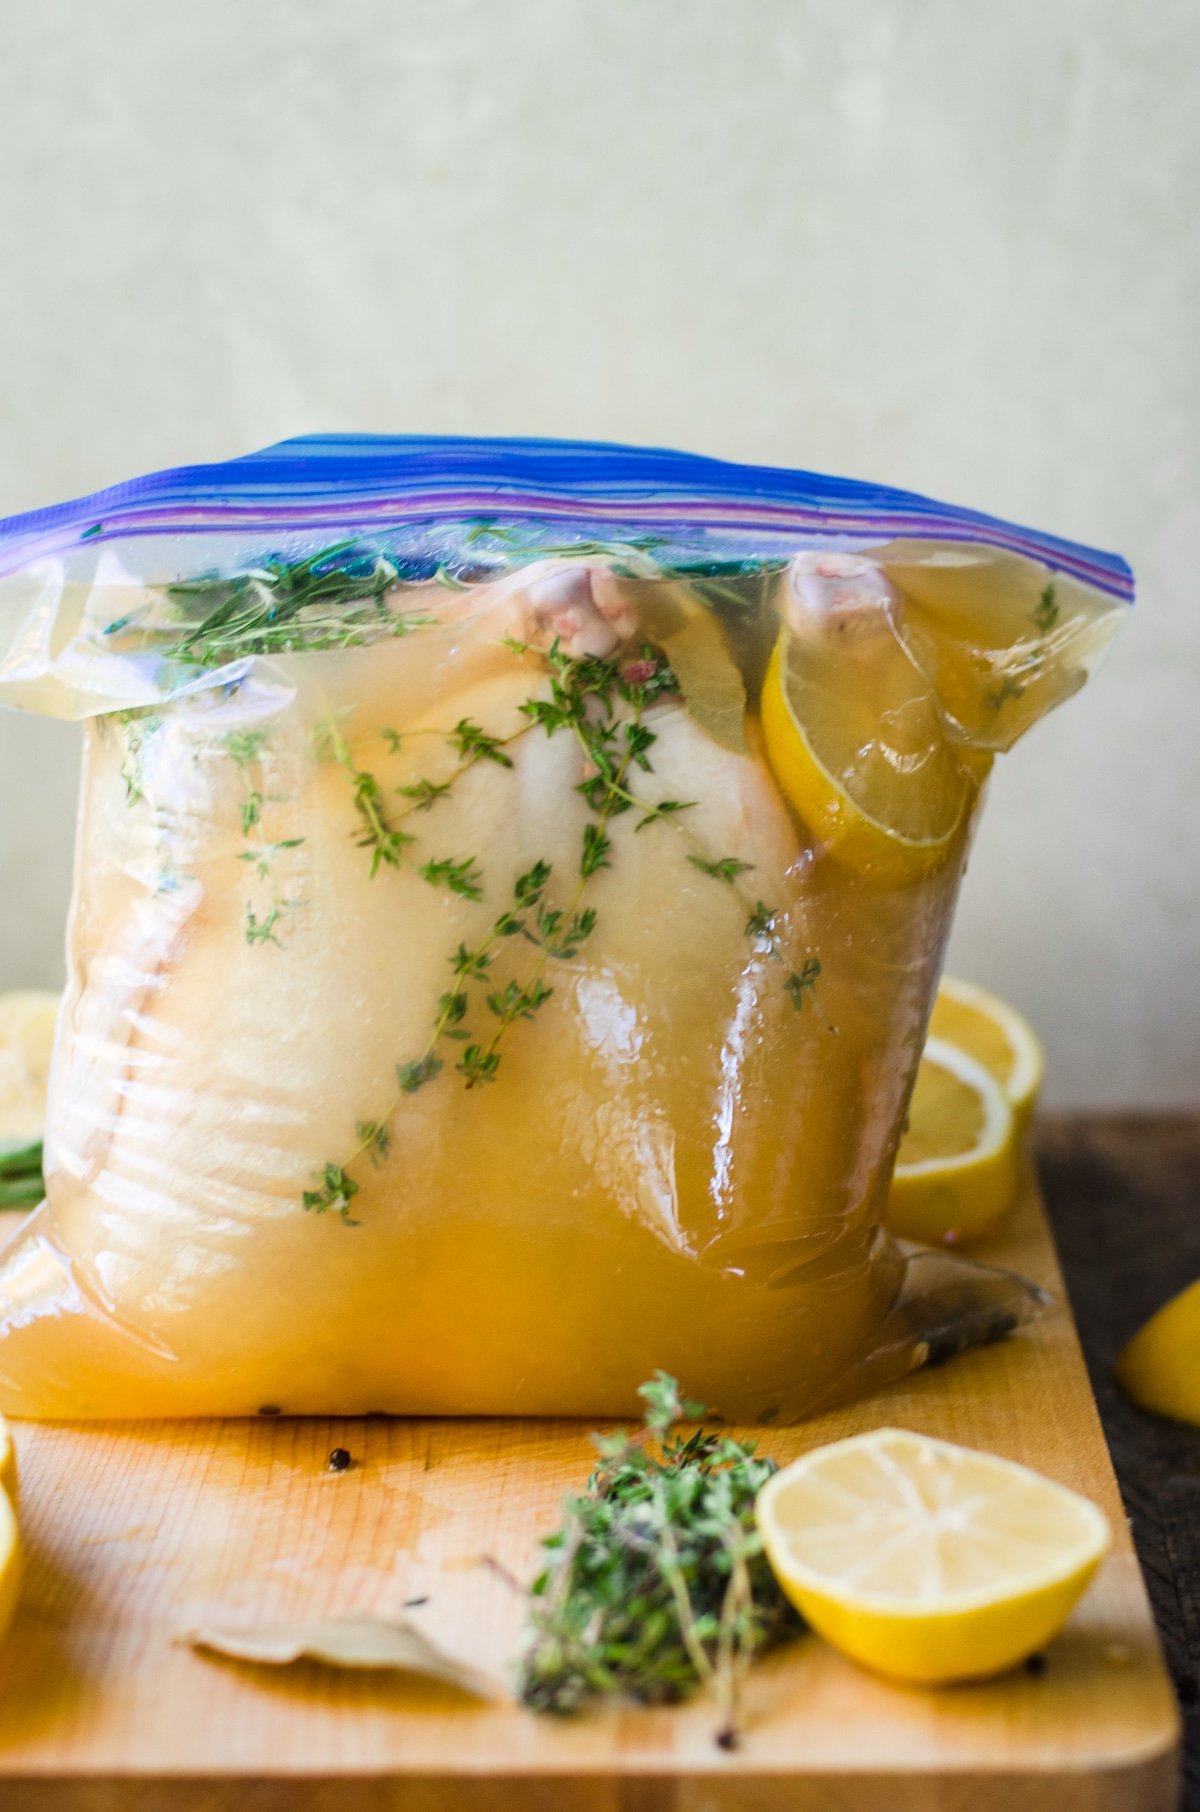 Chicken brining in apple juice and herbs.